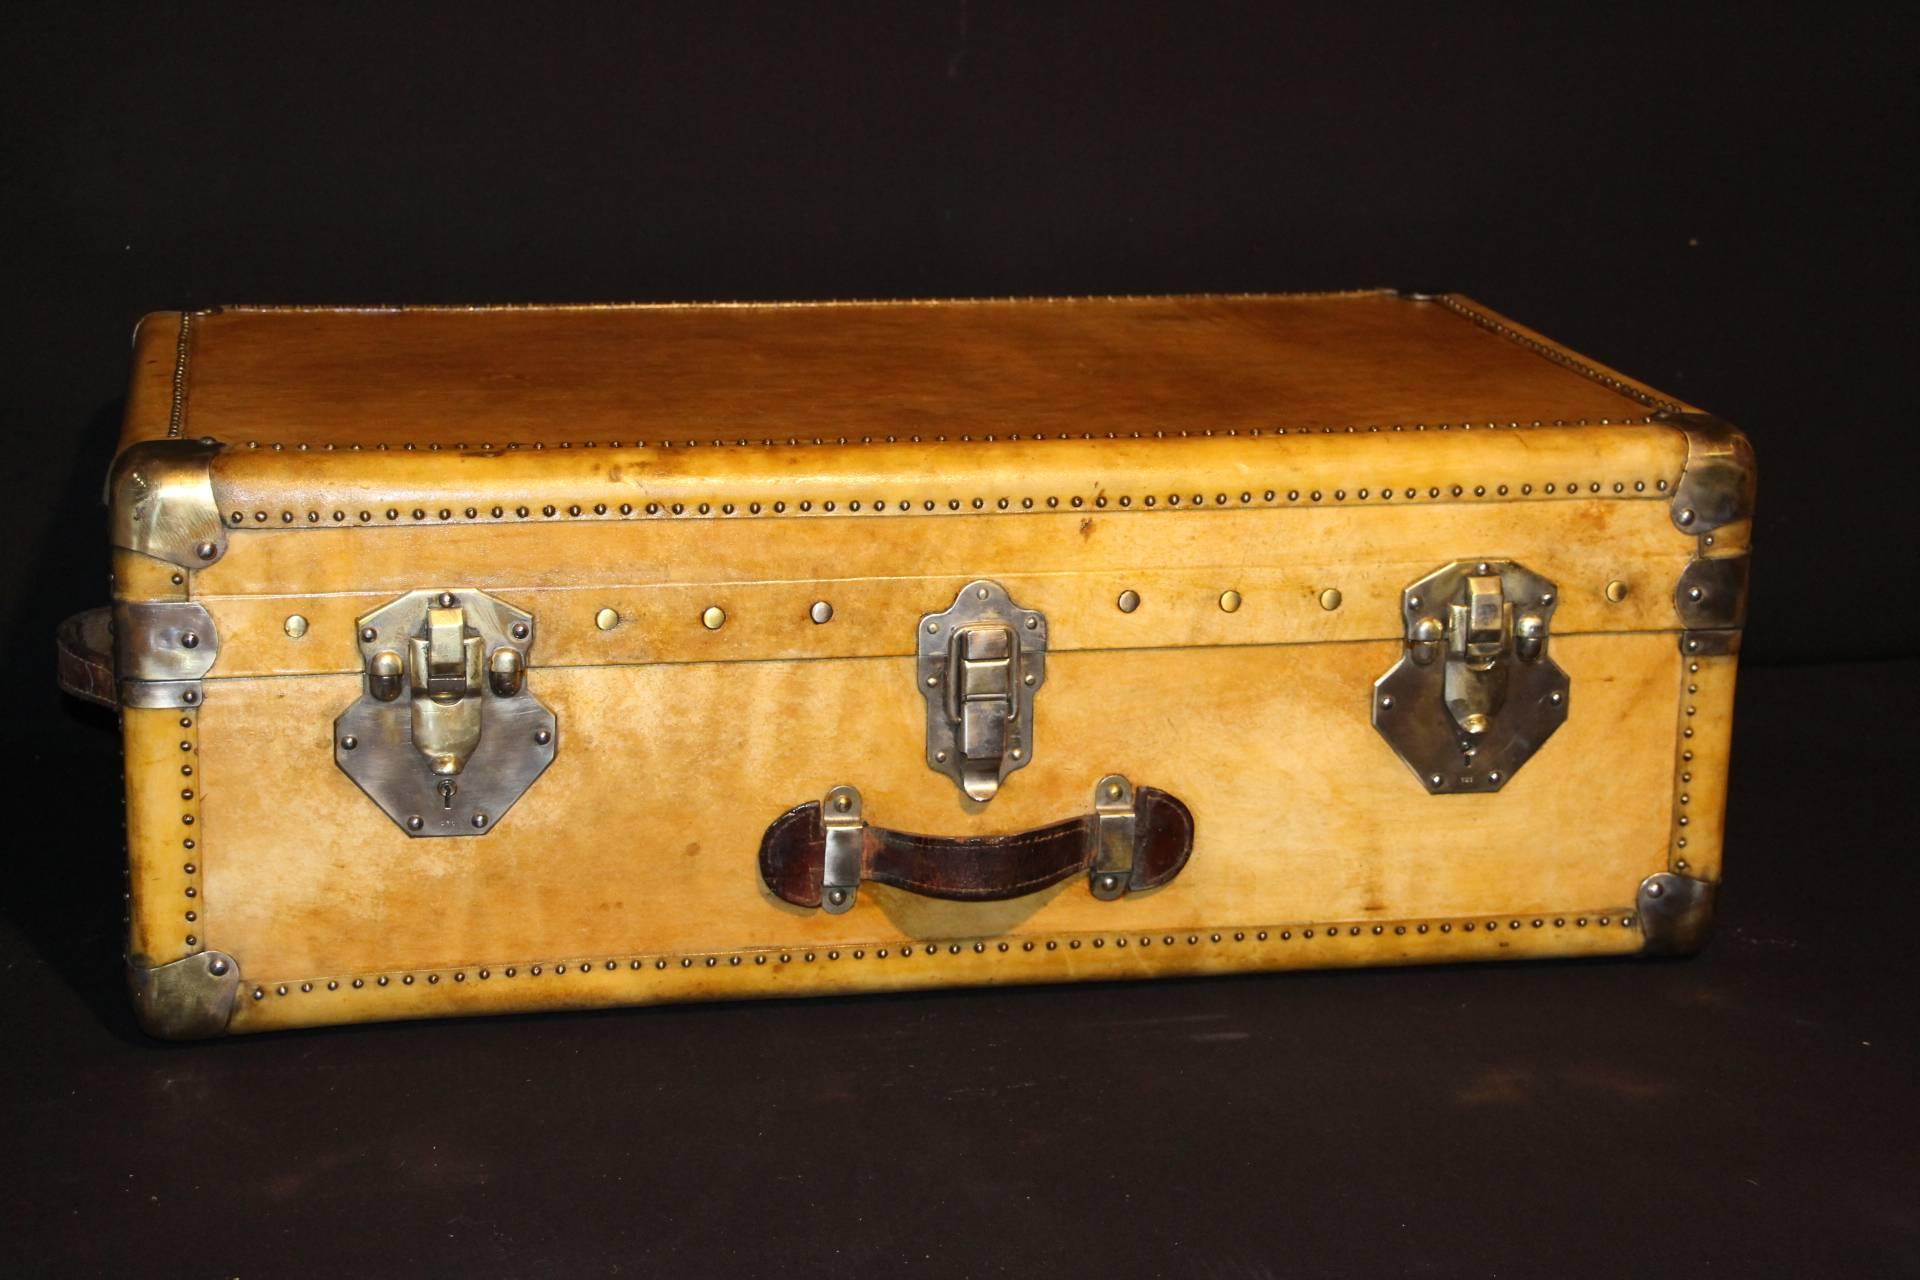 This cabin trunk features vellum,leather handles and aluminum fittings.It has got a very warm patina and is very elegant.
Original yellow interior with a removable tray ,clean and fresh.
Could easily be used for storage
